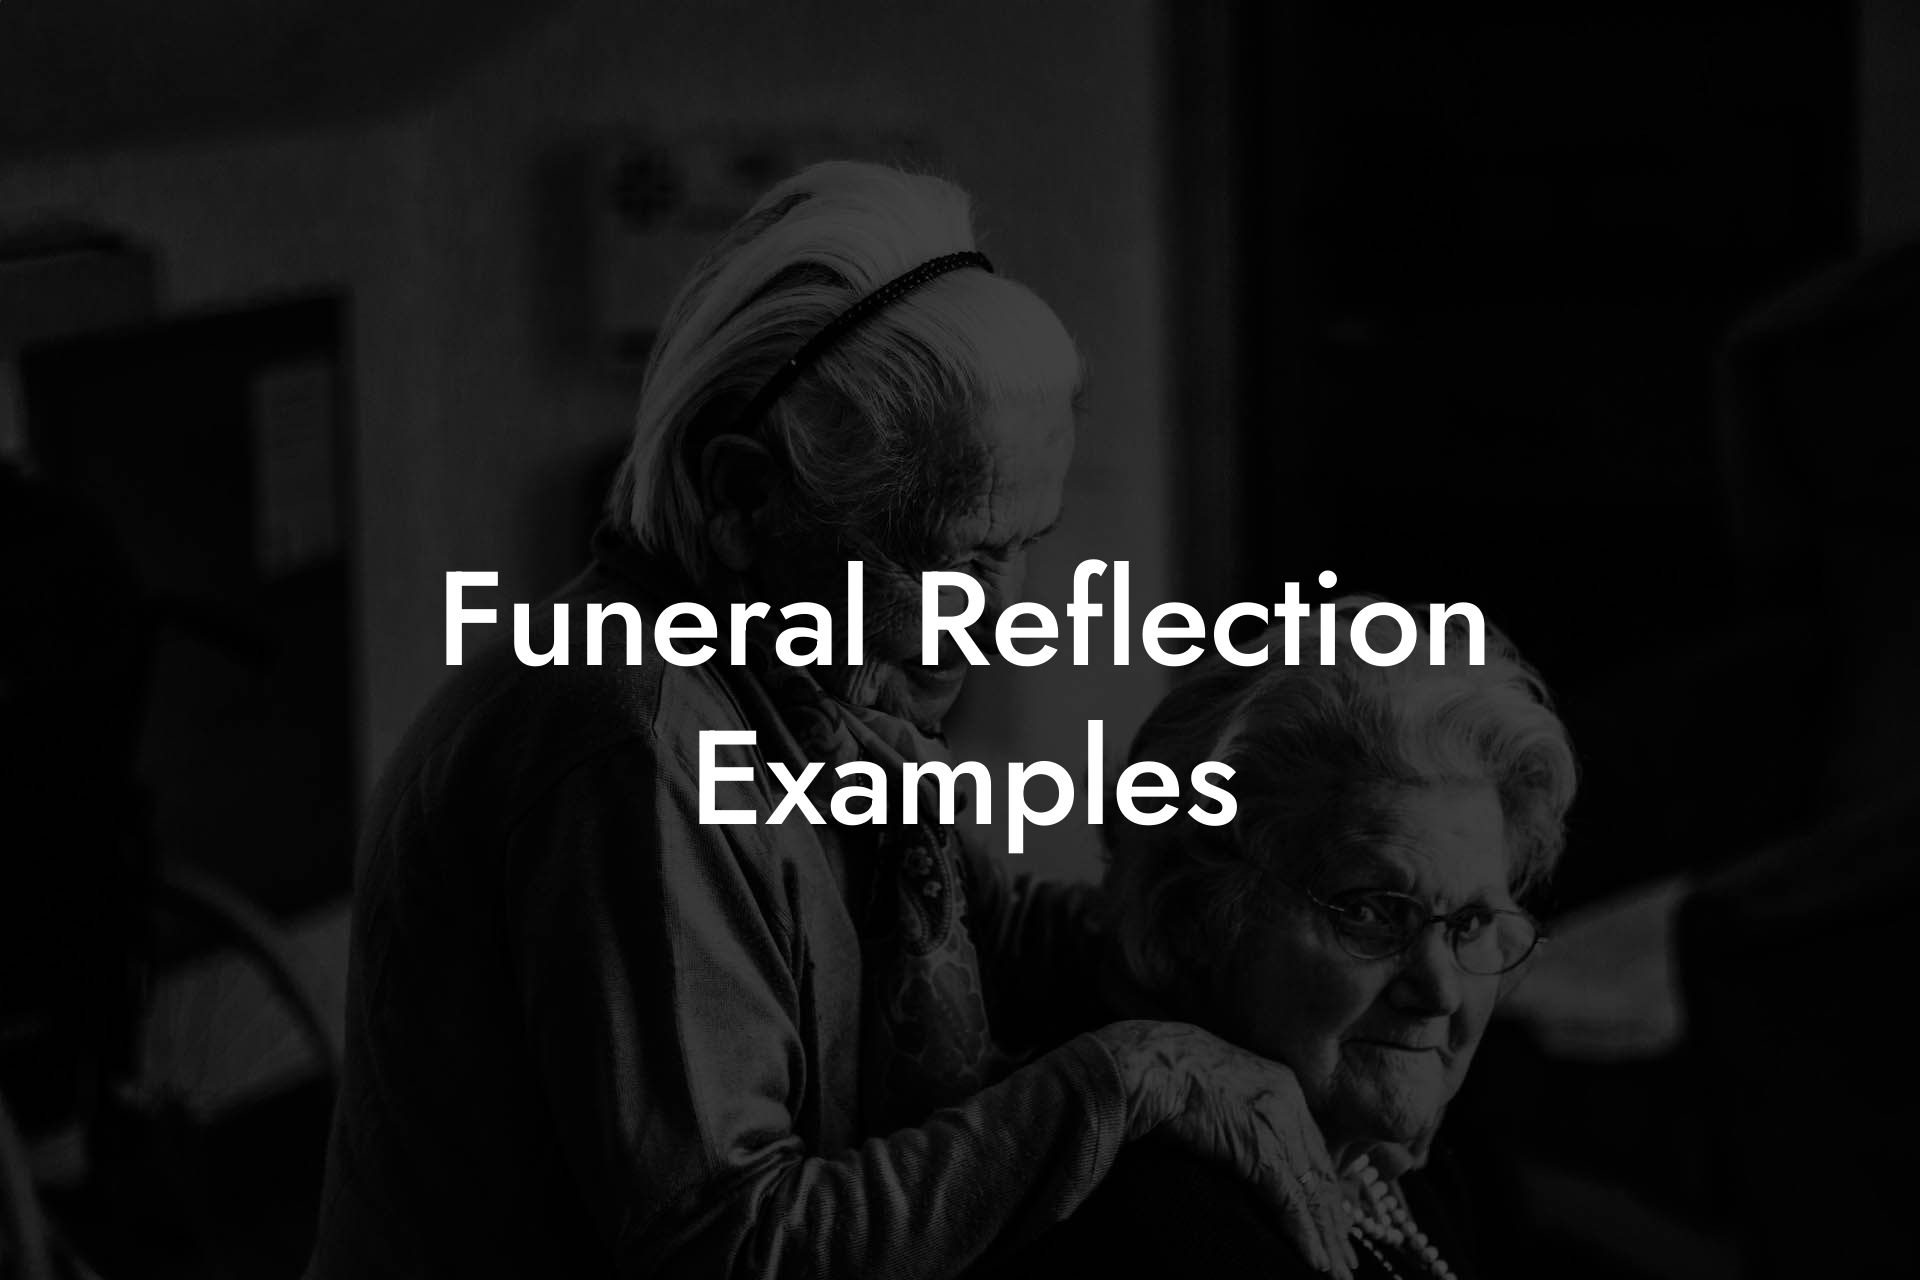 Funeral Reflection Examples